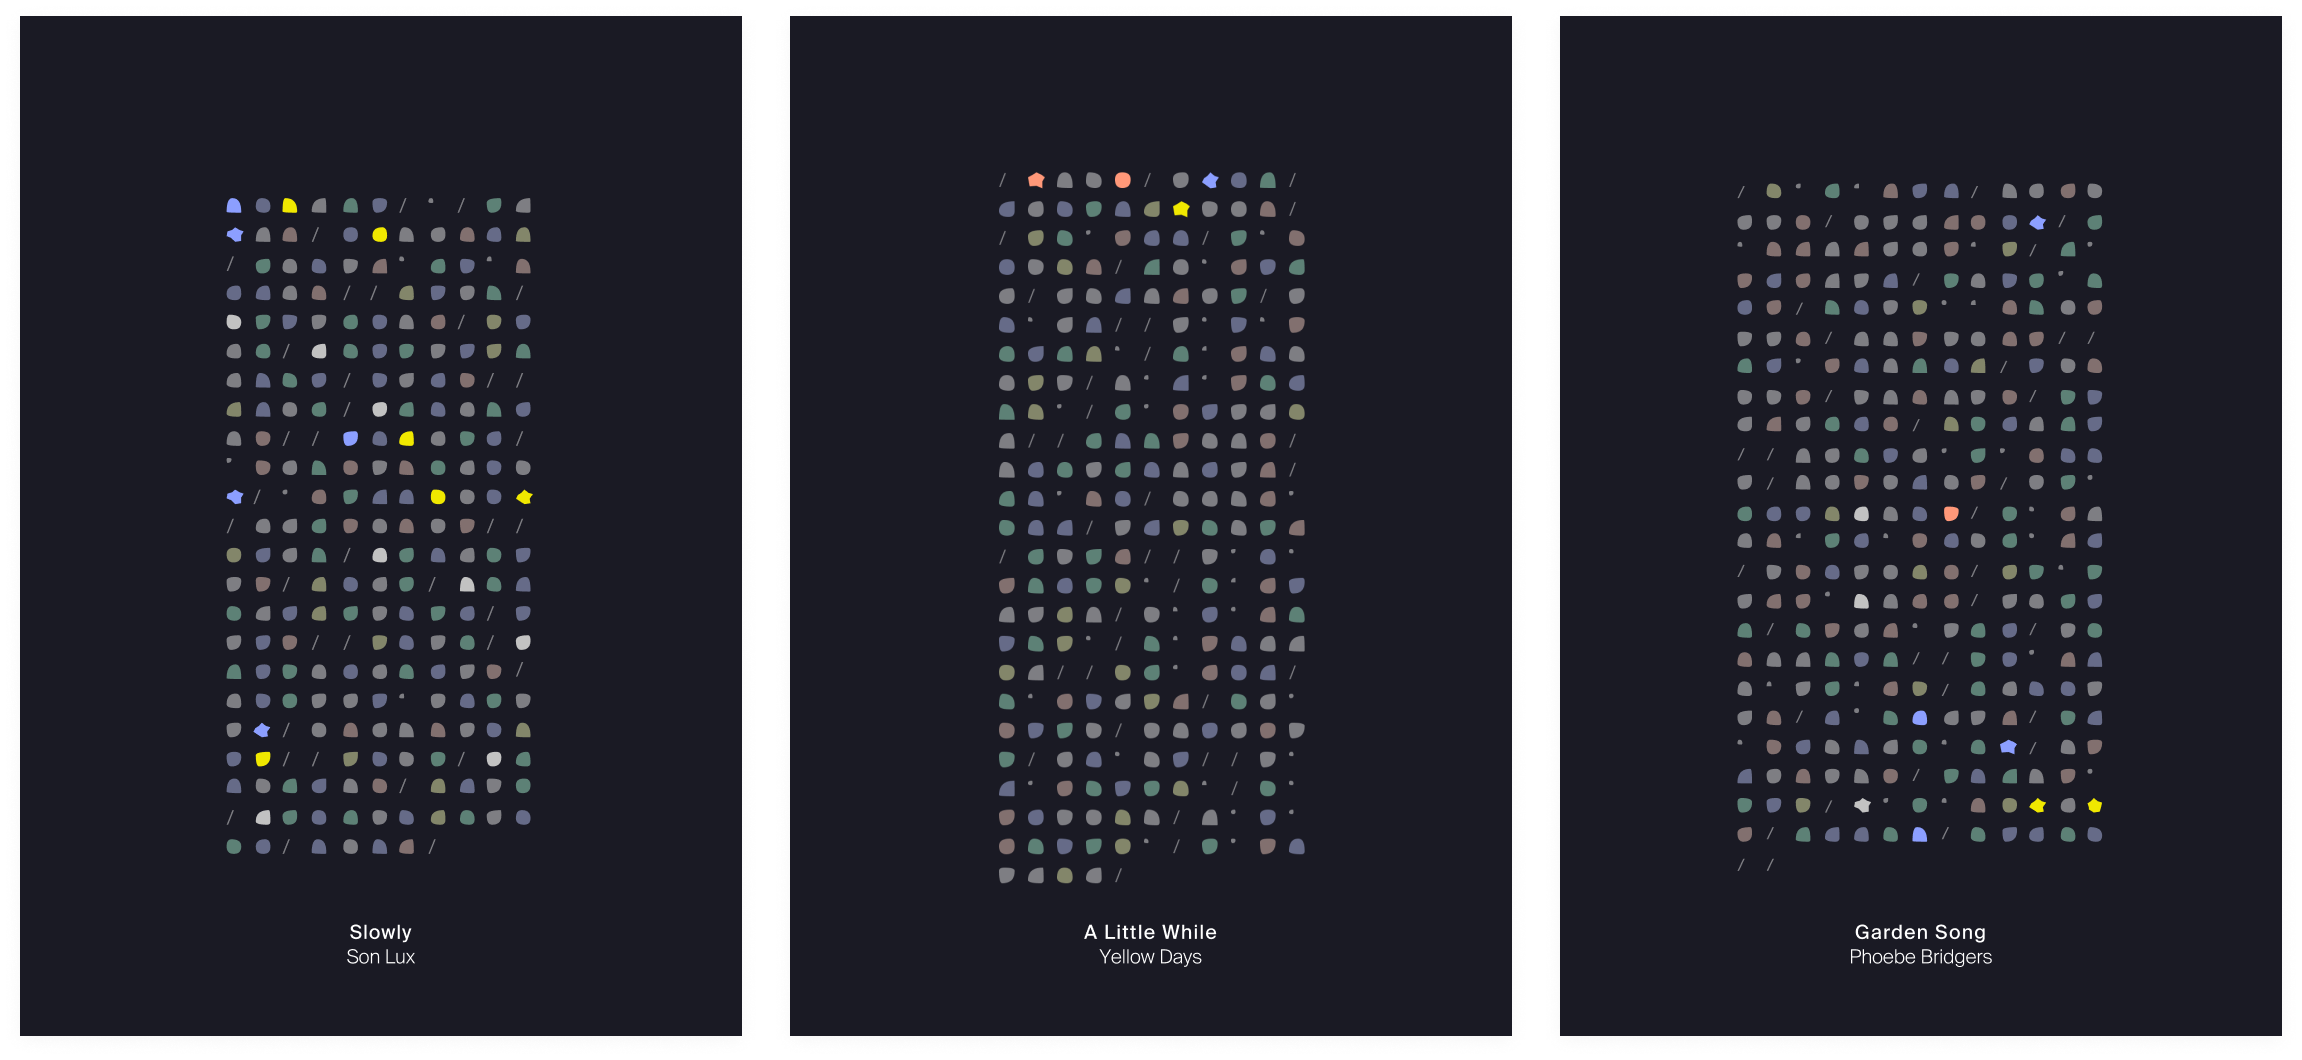 A set of visualizations of three songs: 'Slowly' by Son Lux, 'A Little While' by Yellow Days and 'Garden Song' by Phoebe Bridgers